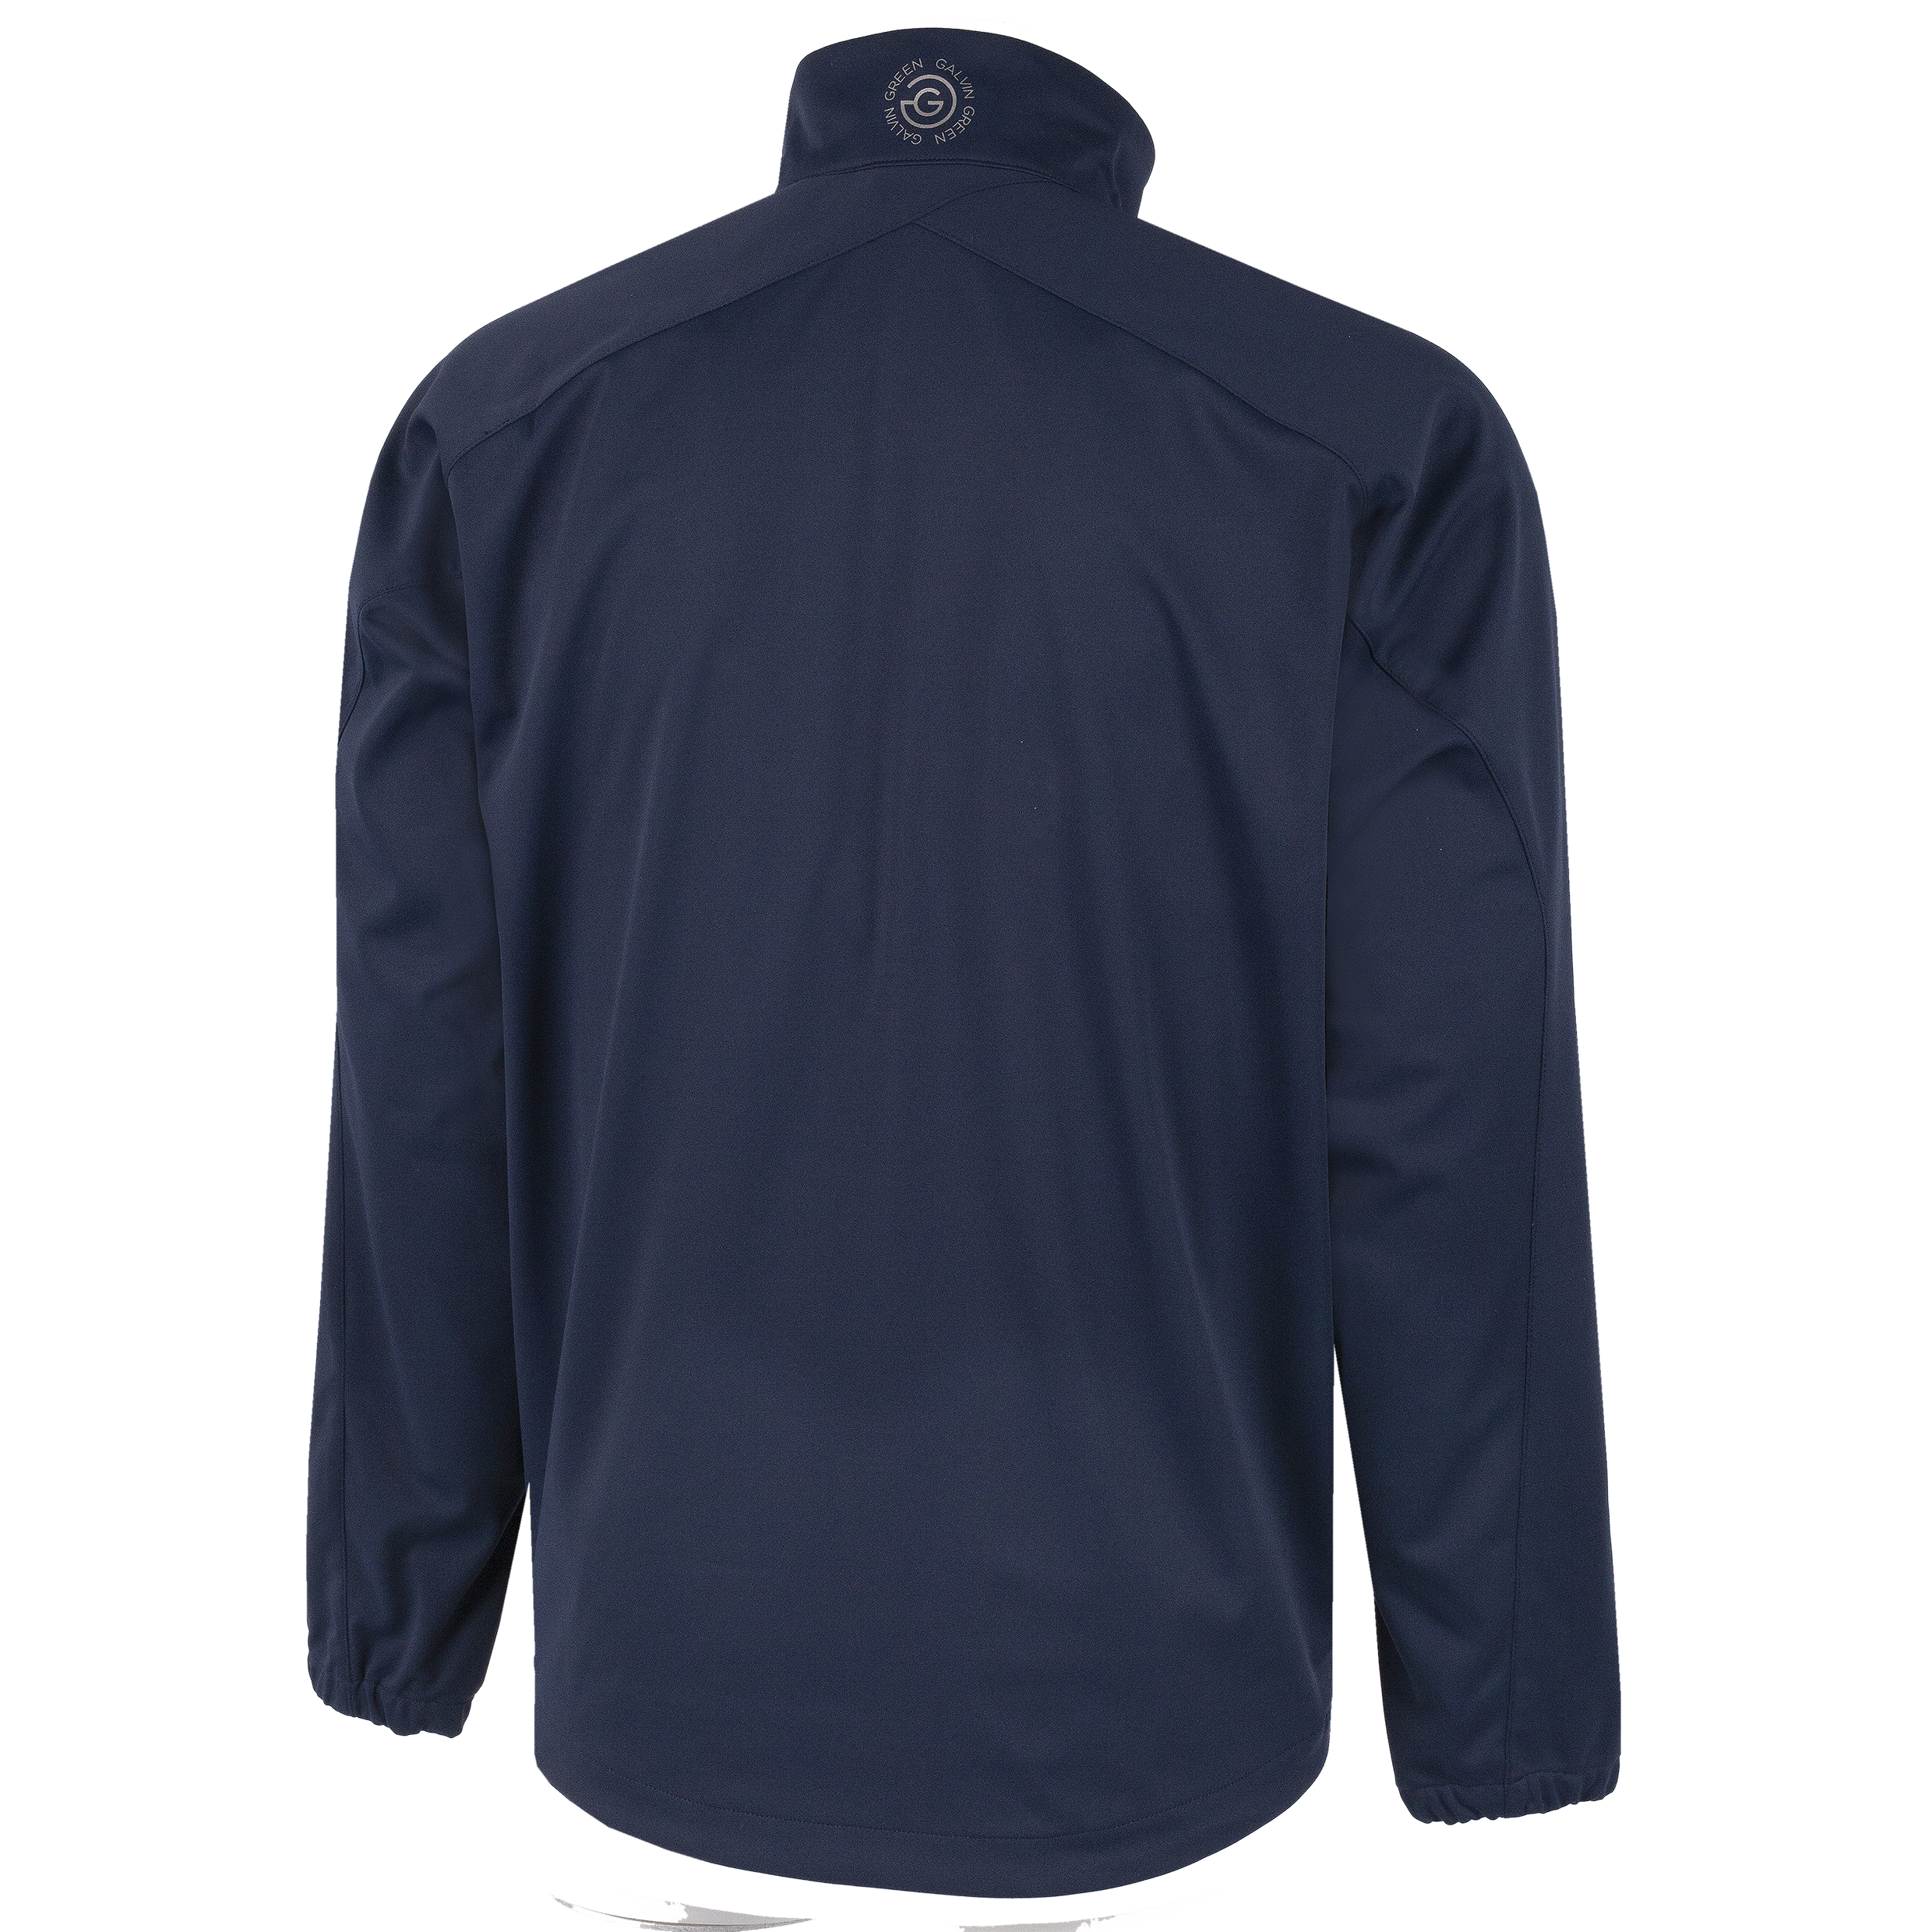 NAVY 'LUCAS'  windproof golf jacket in INTERFACE-1™ stretch fabric.